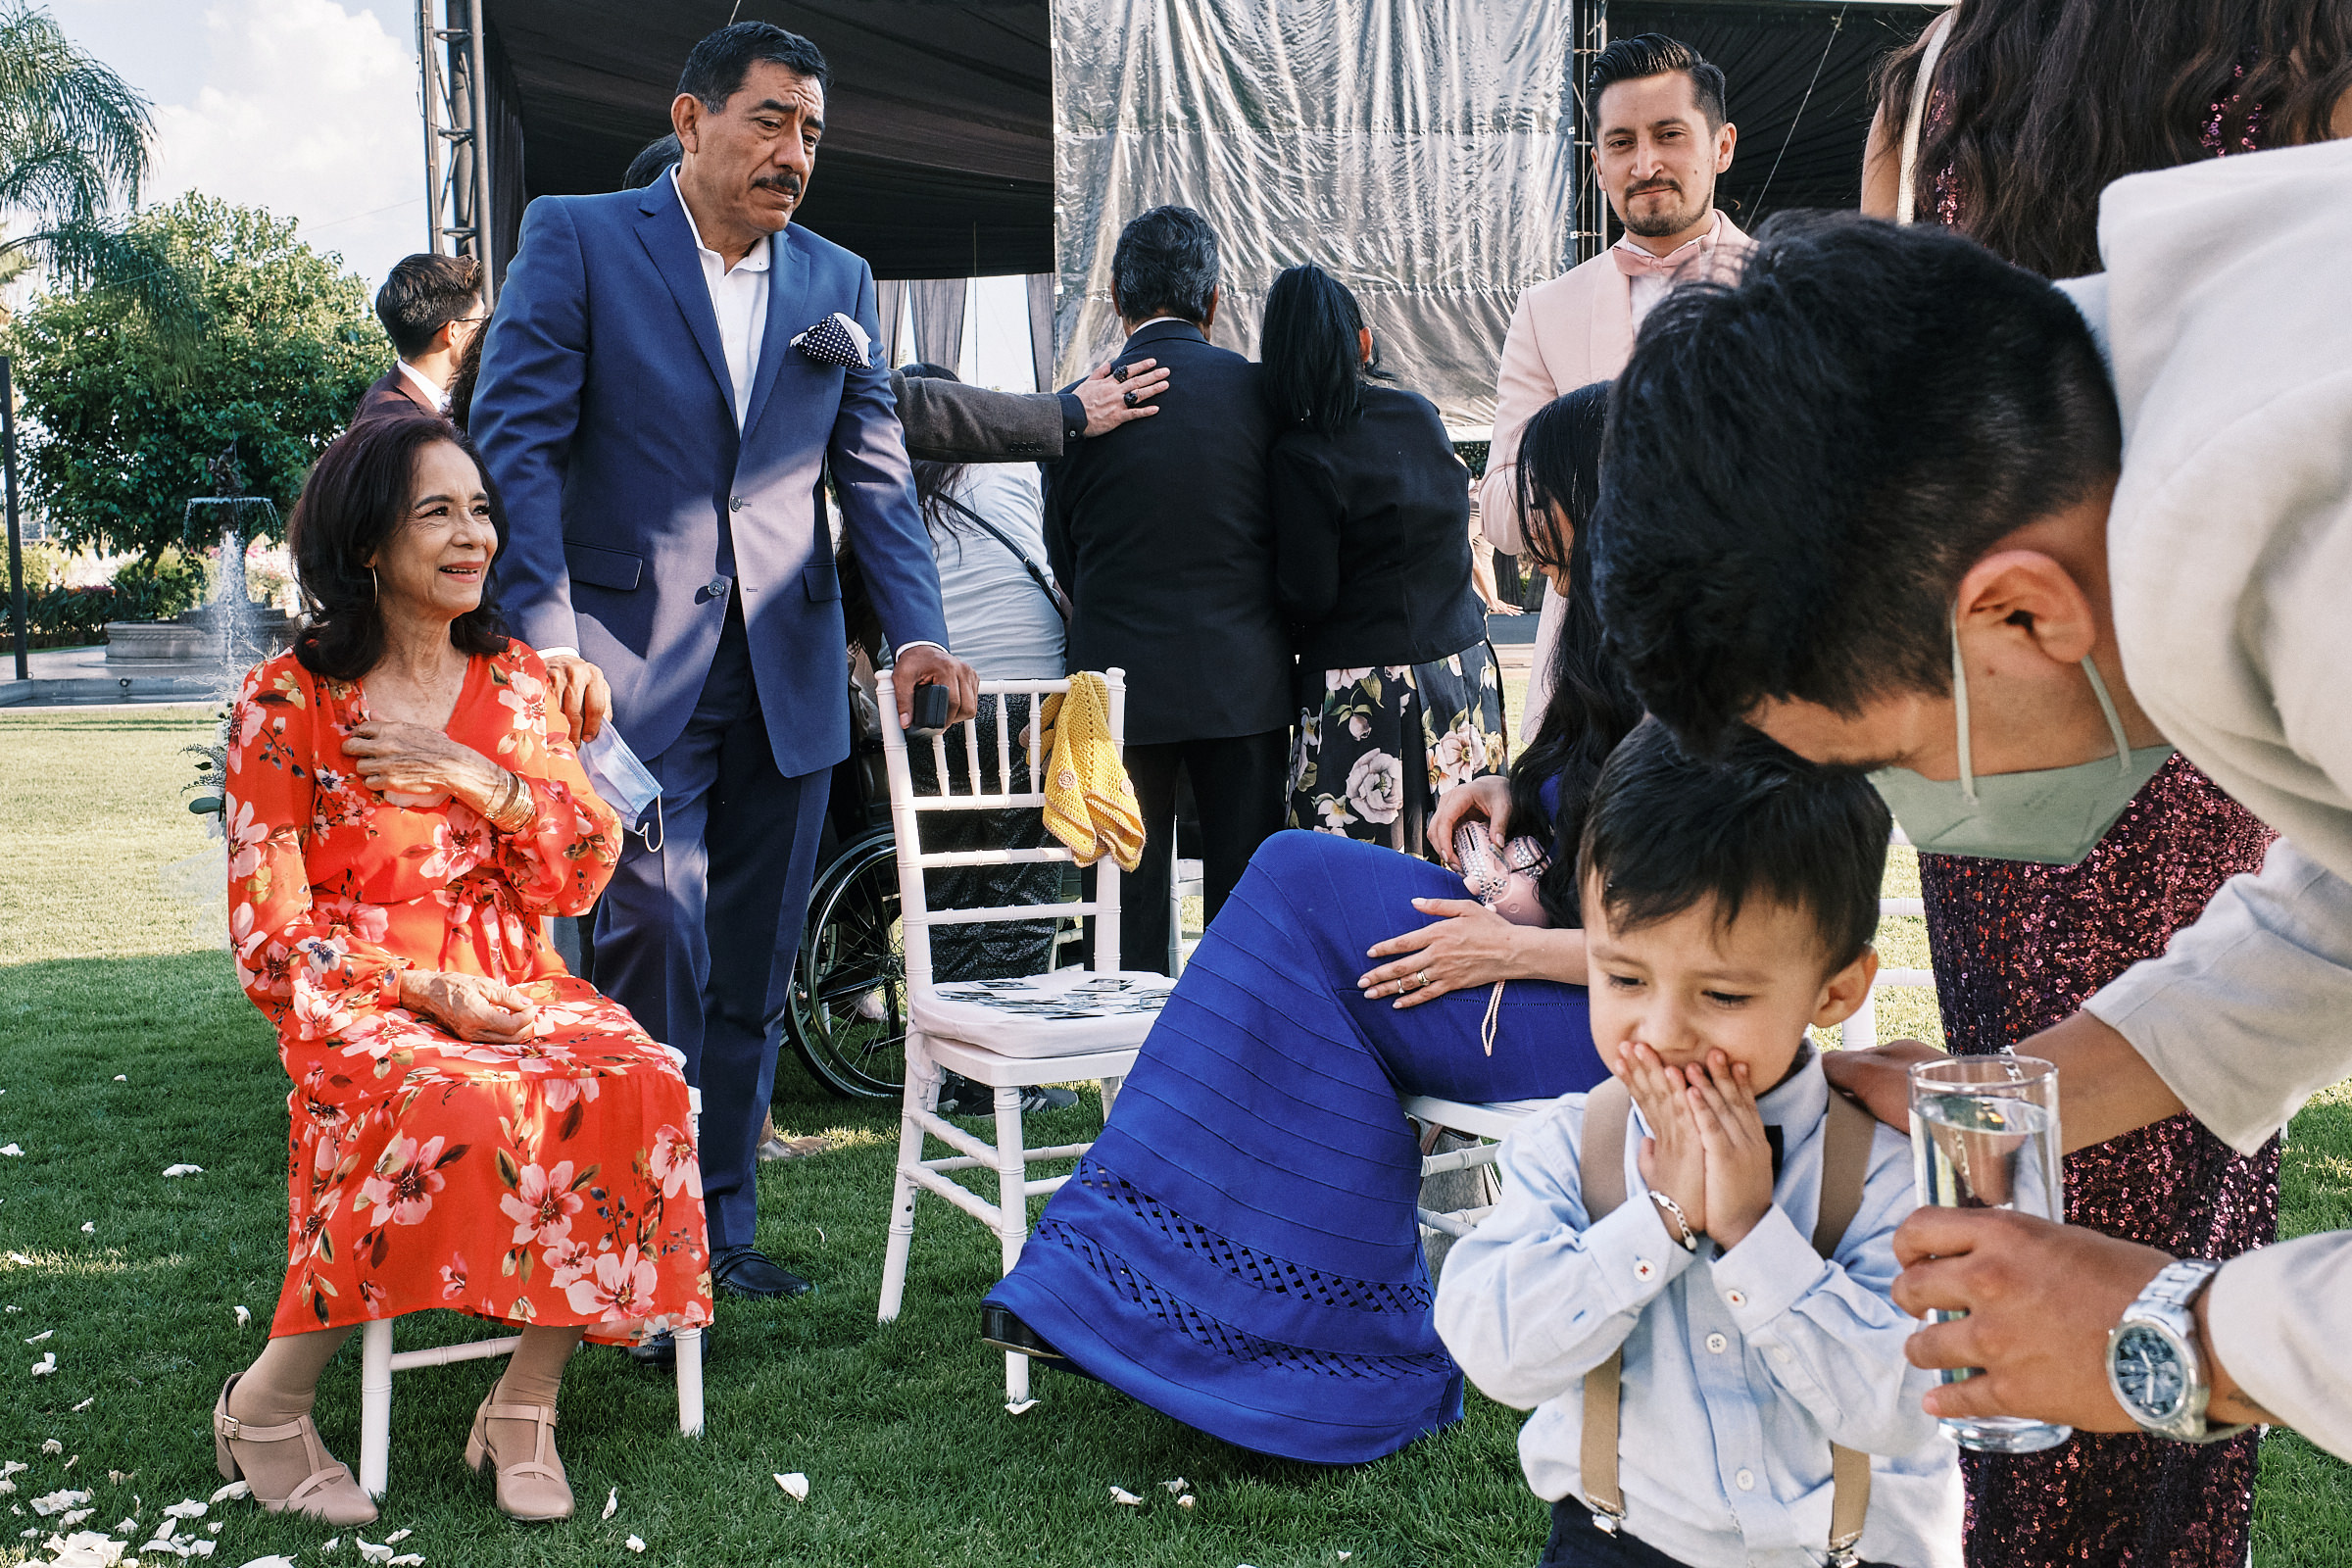 Little Boy Covers His Mouth As Wedding Guests Chat In The Background In Atlixco